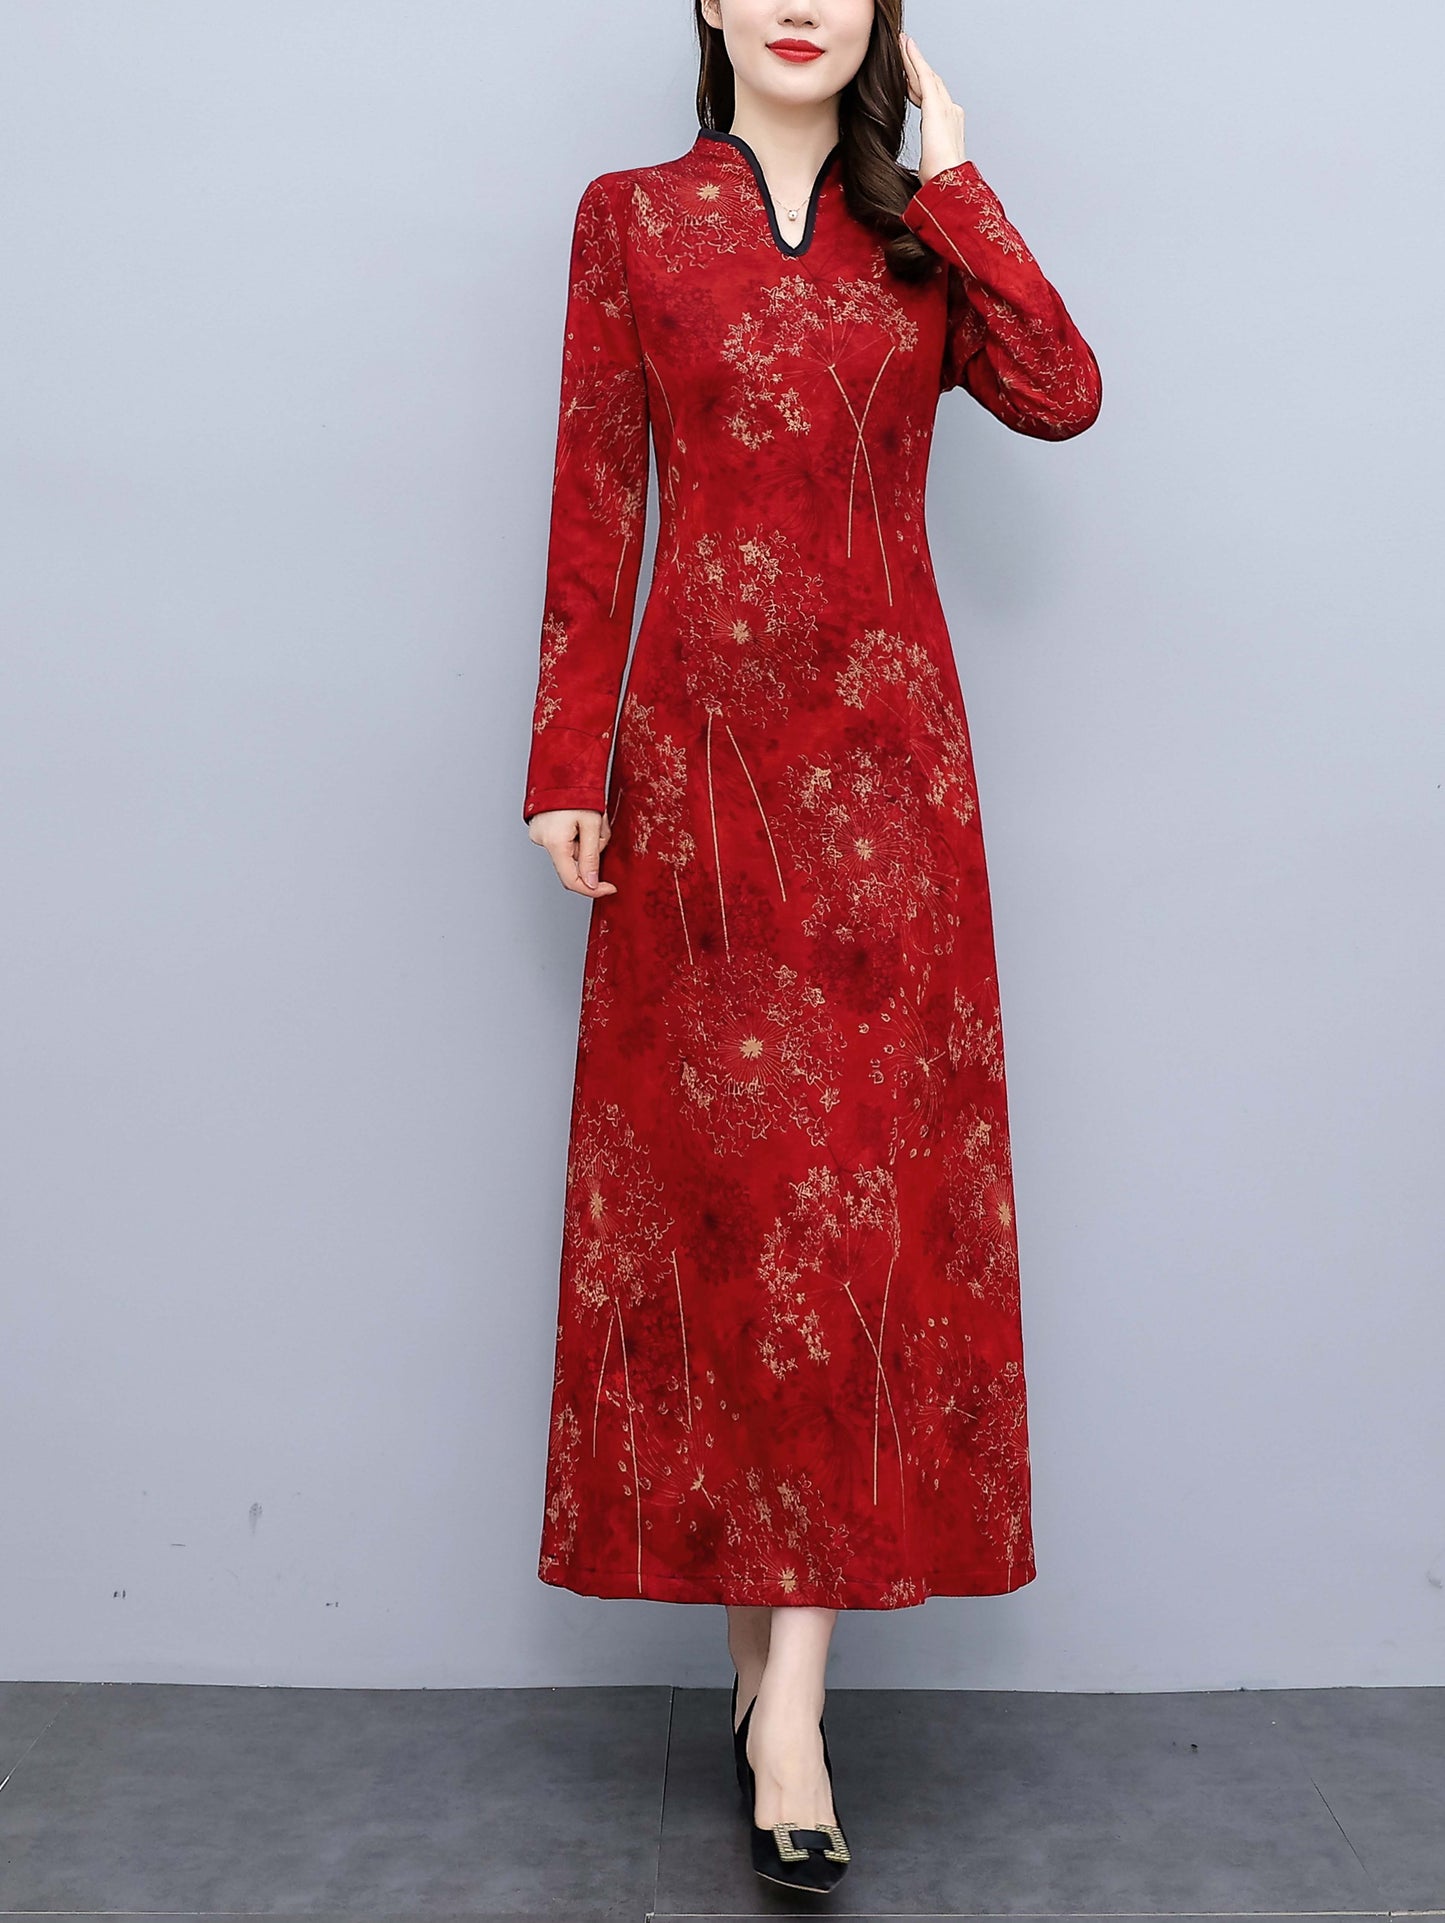 Red V Neck Long Sleeves Floral Print with Pocket Maxi Dress